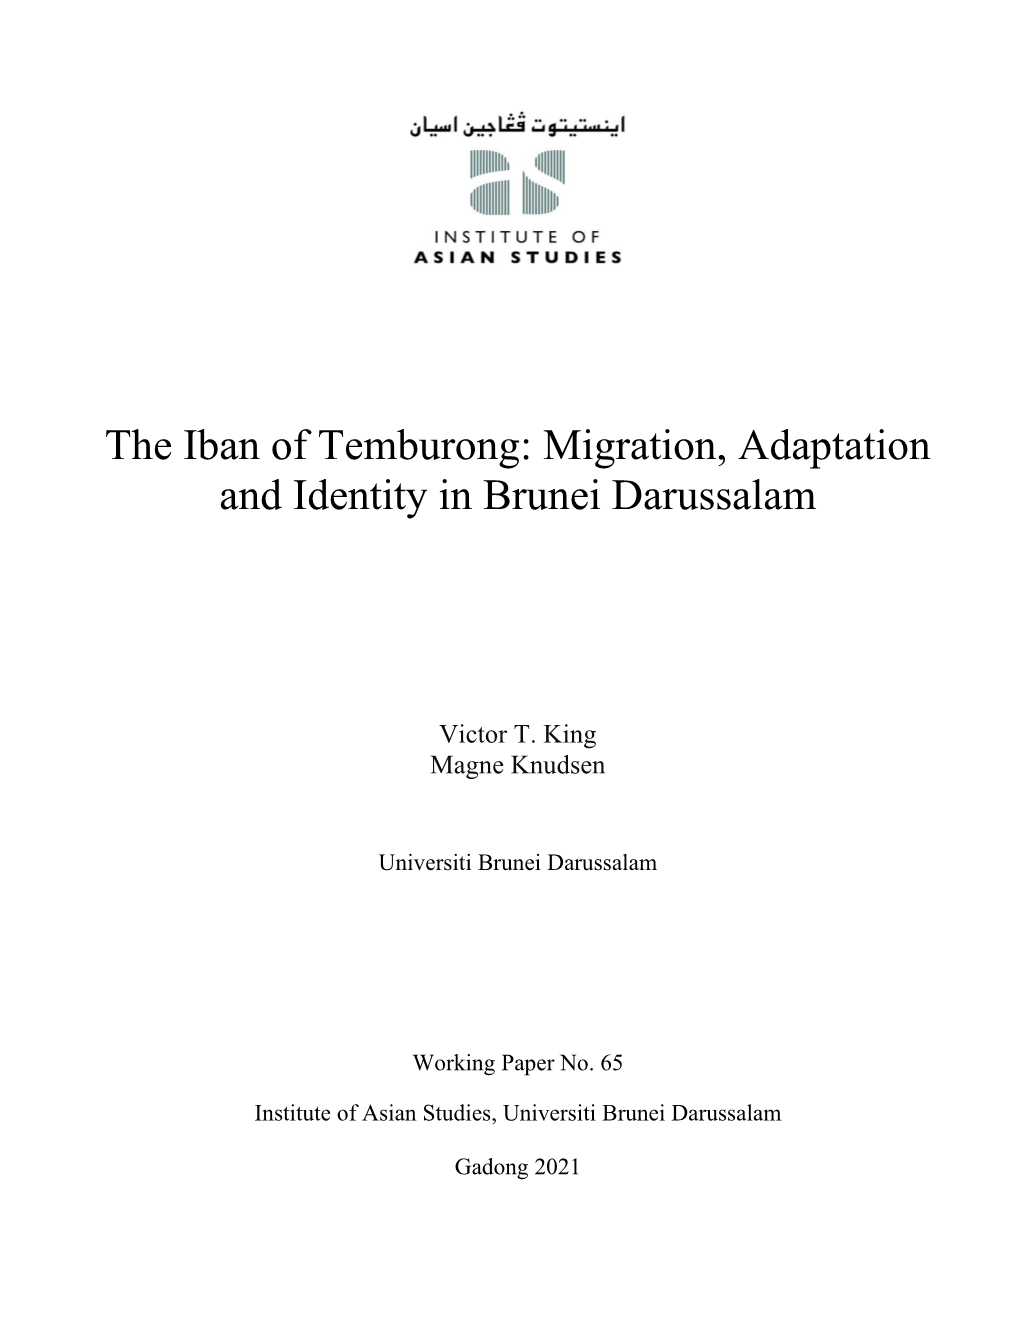 The Iban of Temburong: Migration, Adaptation and Identity in Brunei Darussalam